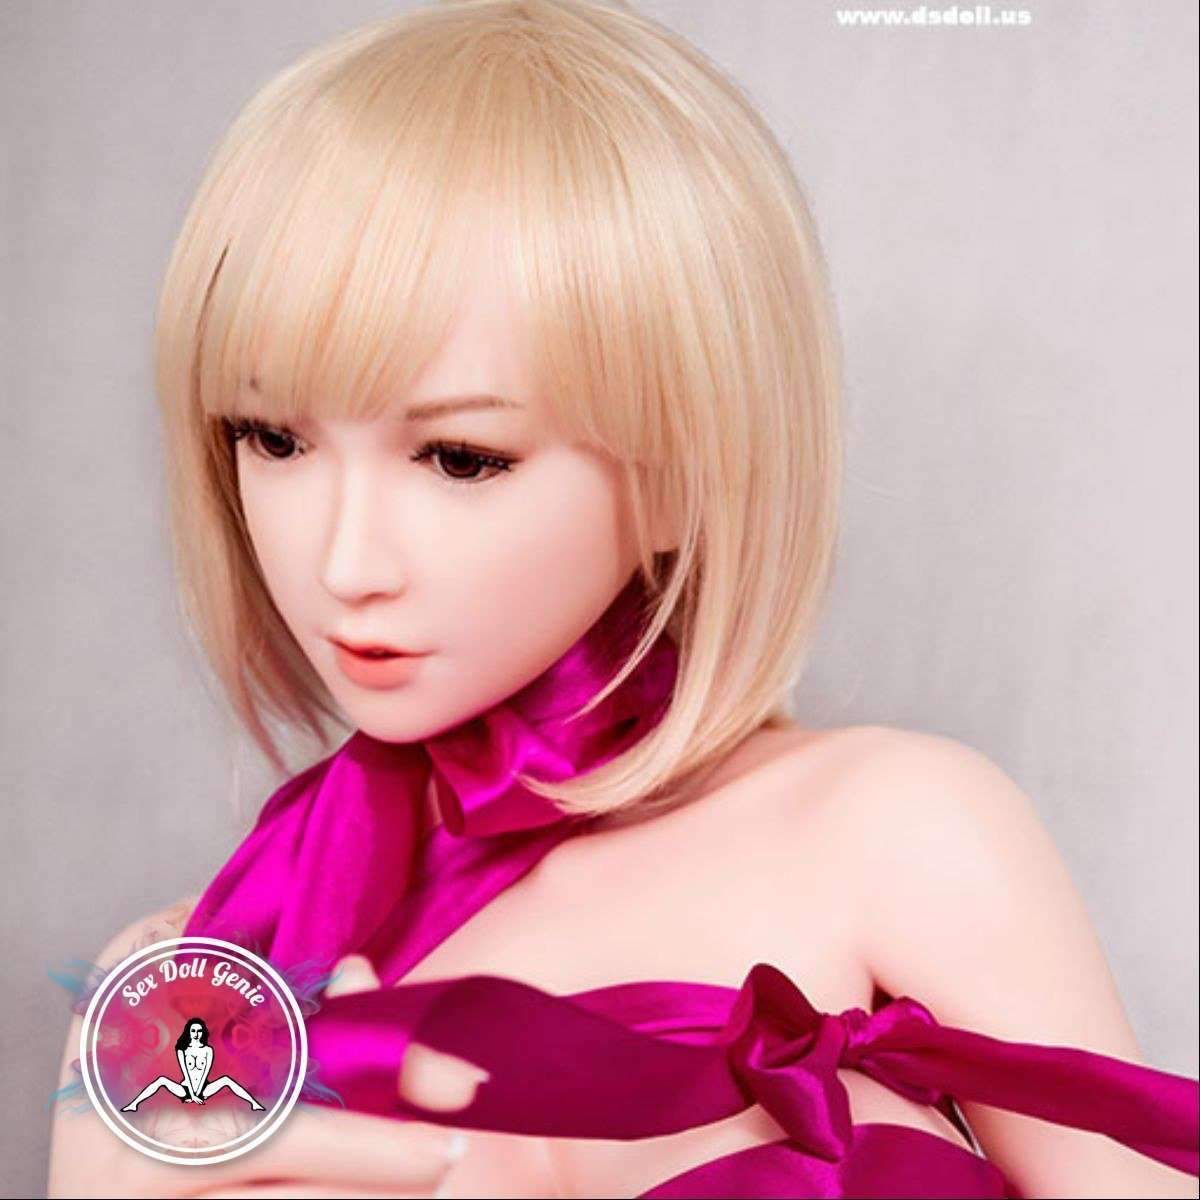 DS Doll - 163Plus - Jiayi Head - Type 1 D Cup Silicone Doll-10